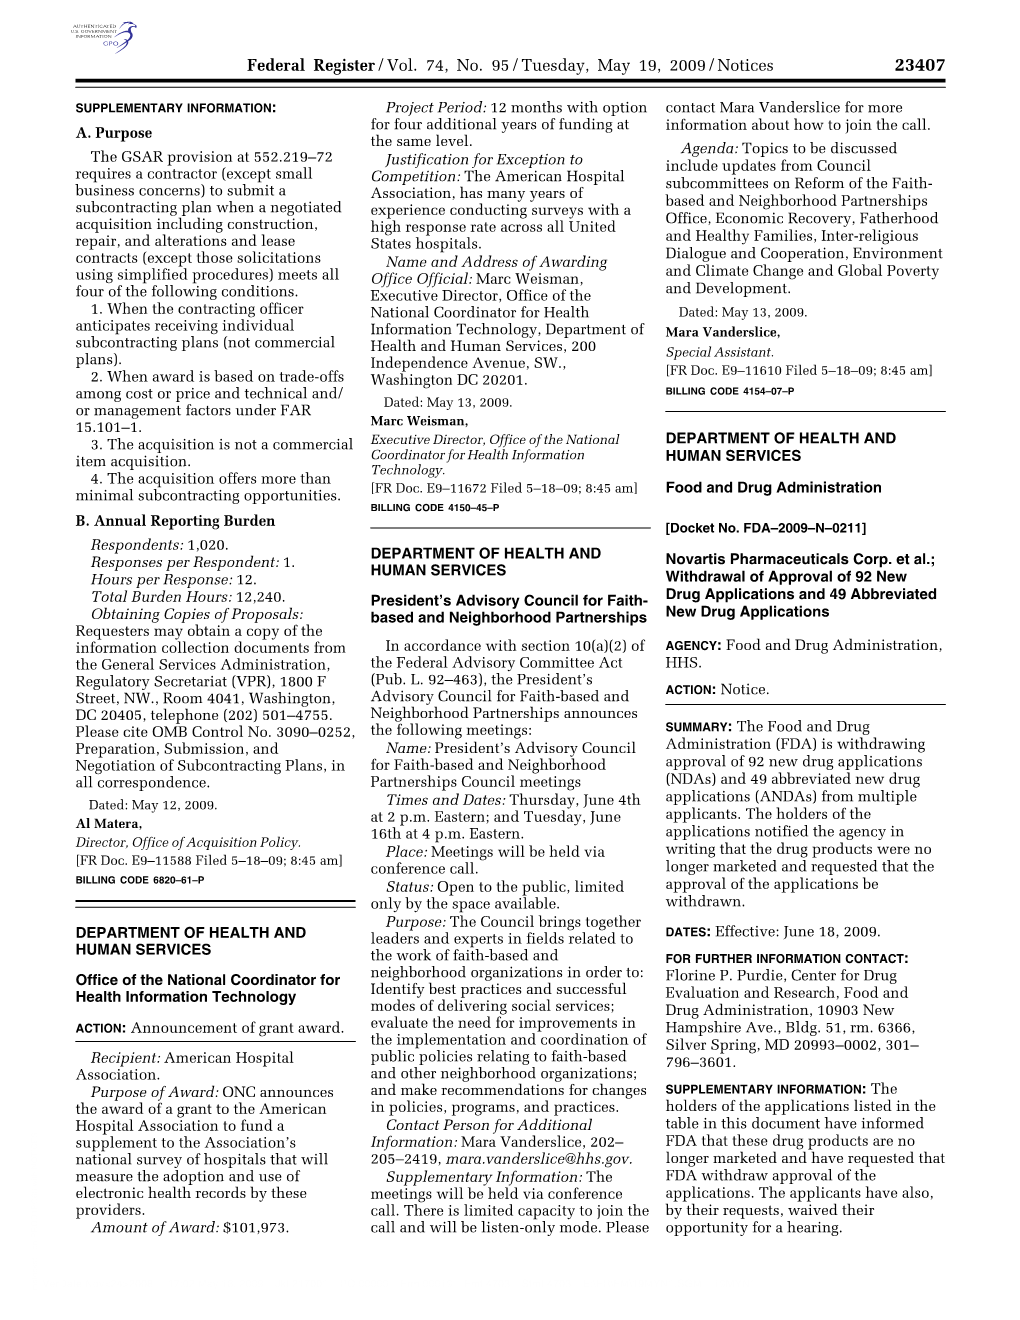 Federal Register/Vol. 74, No. 95/Tuesday, May 19, 2009/Notices